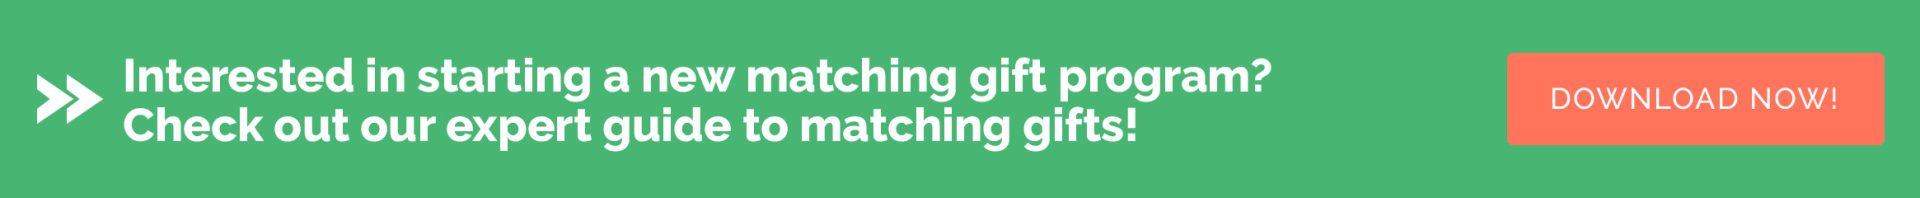 Interested in starting a matching gift program? Check out our expert guide to matching gifts! Download now!